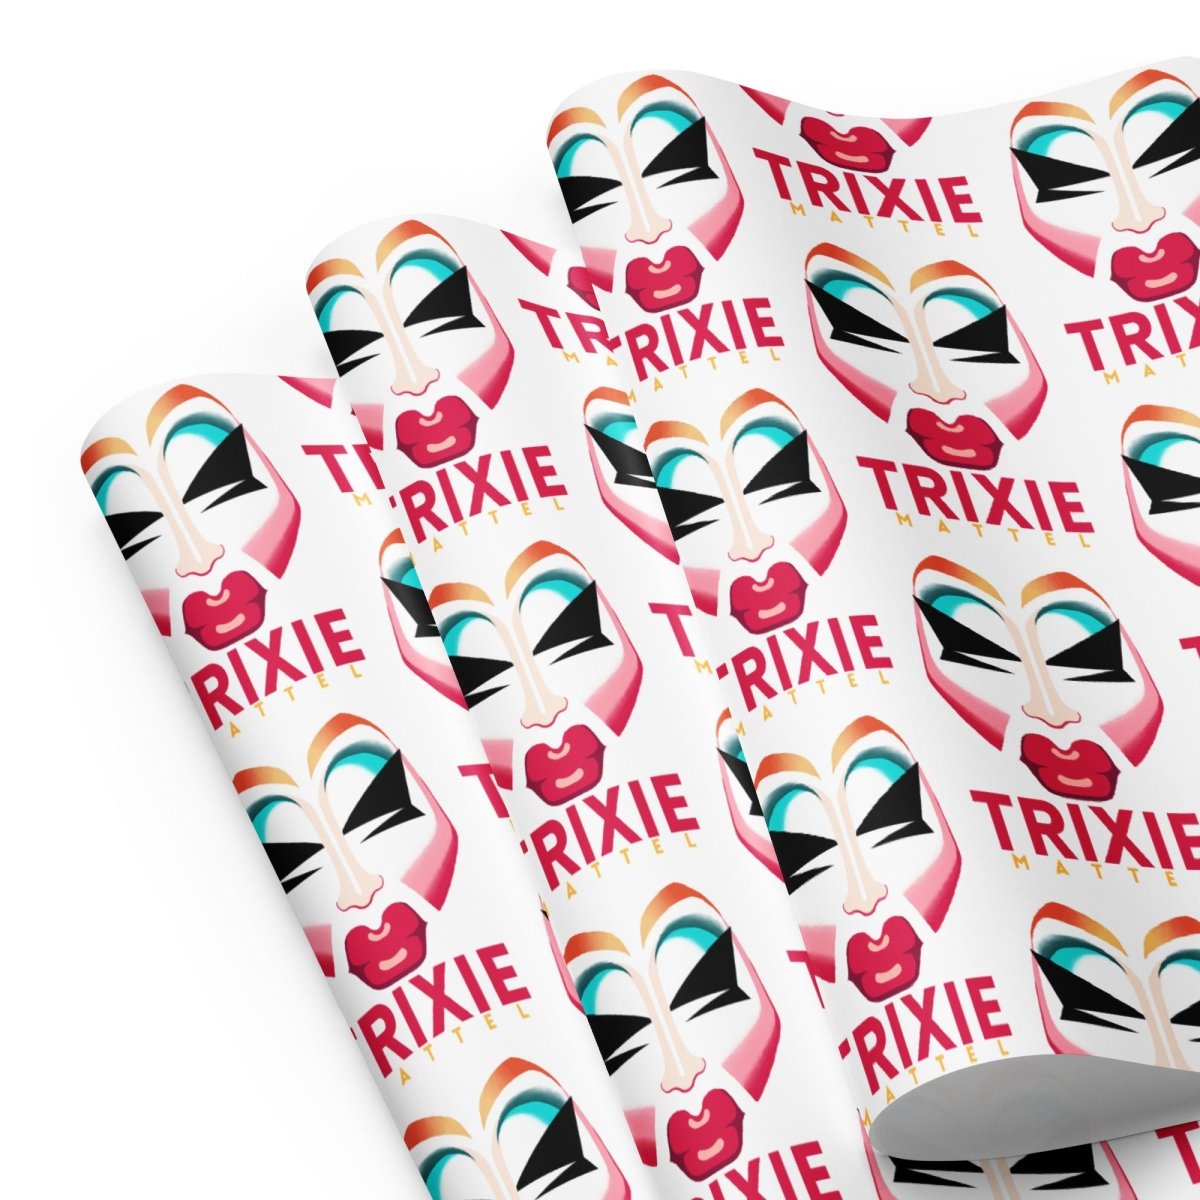 Trixie Mattel - Face Wrapping paper sheets - dragqueenmerch